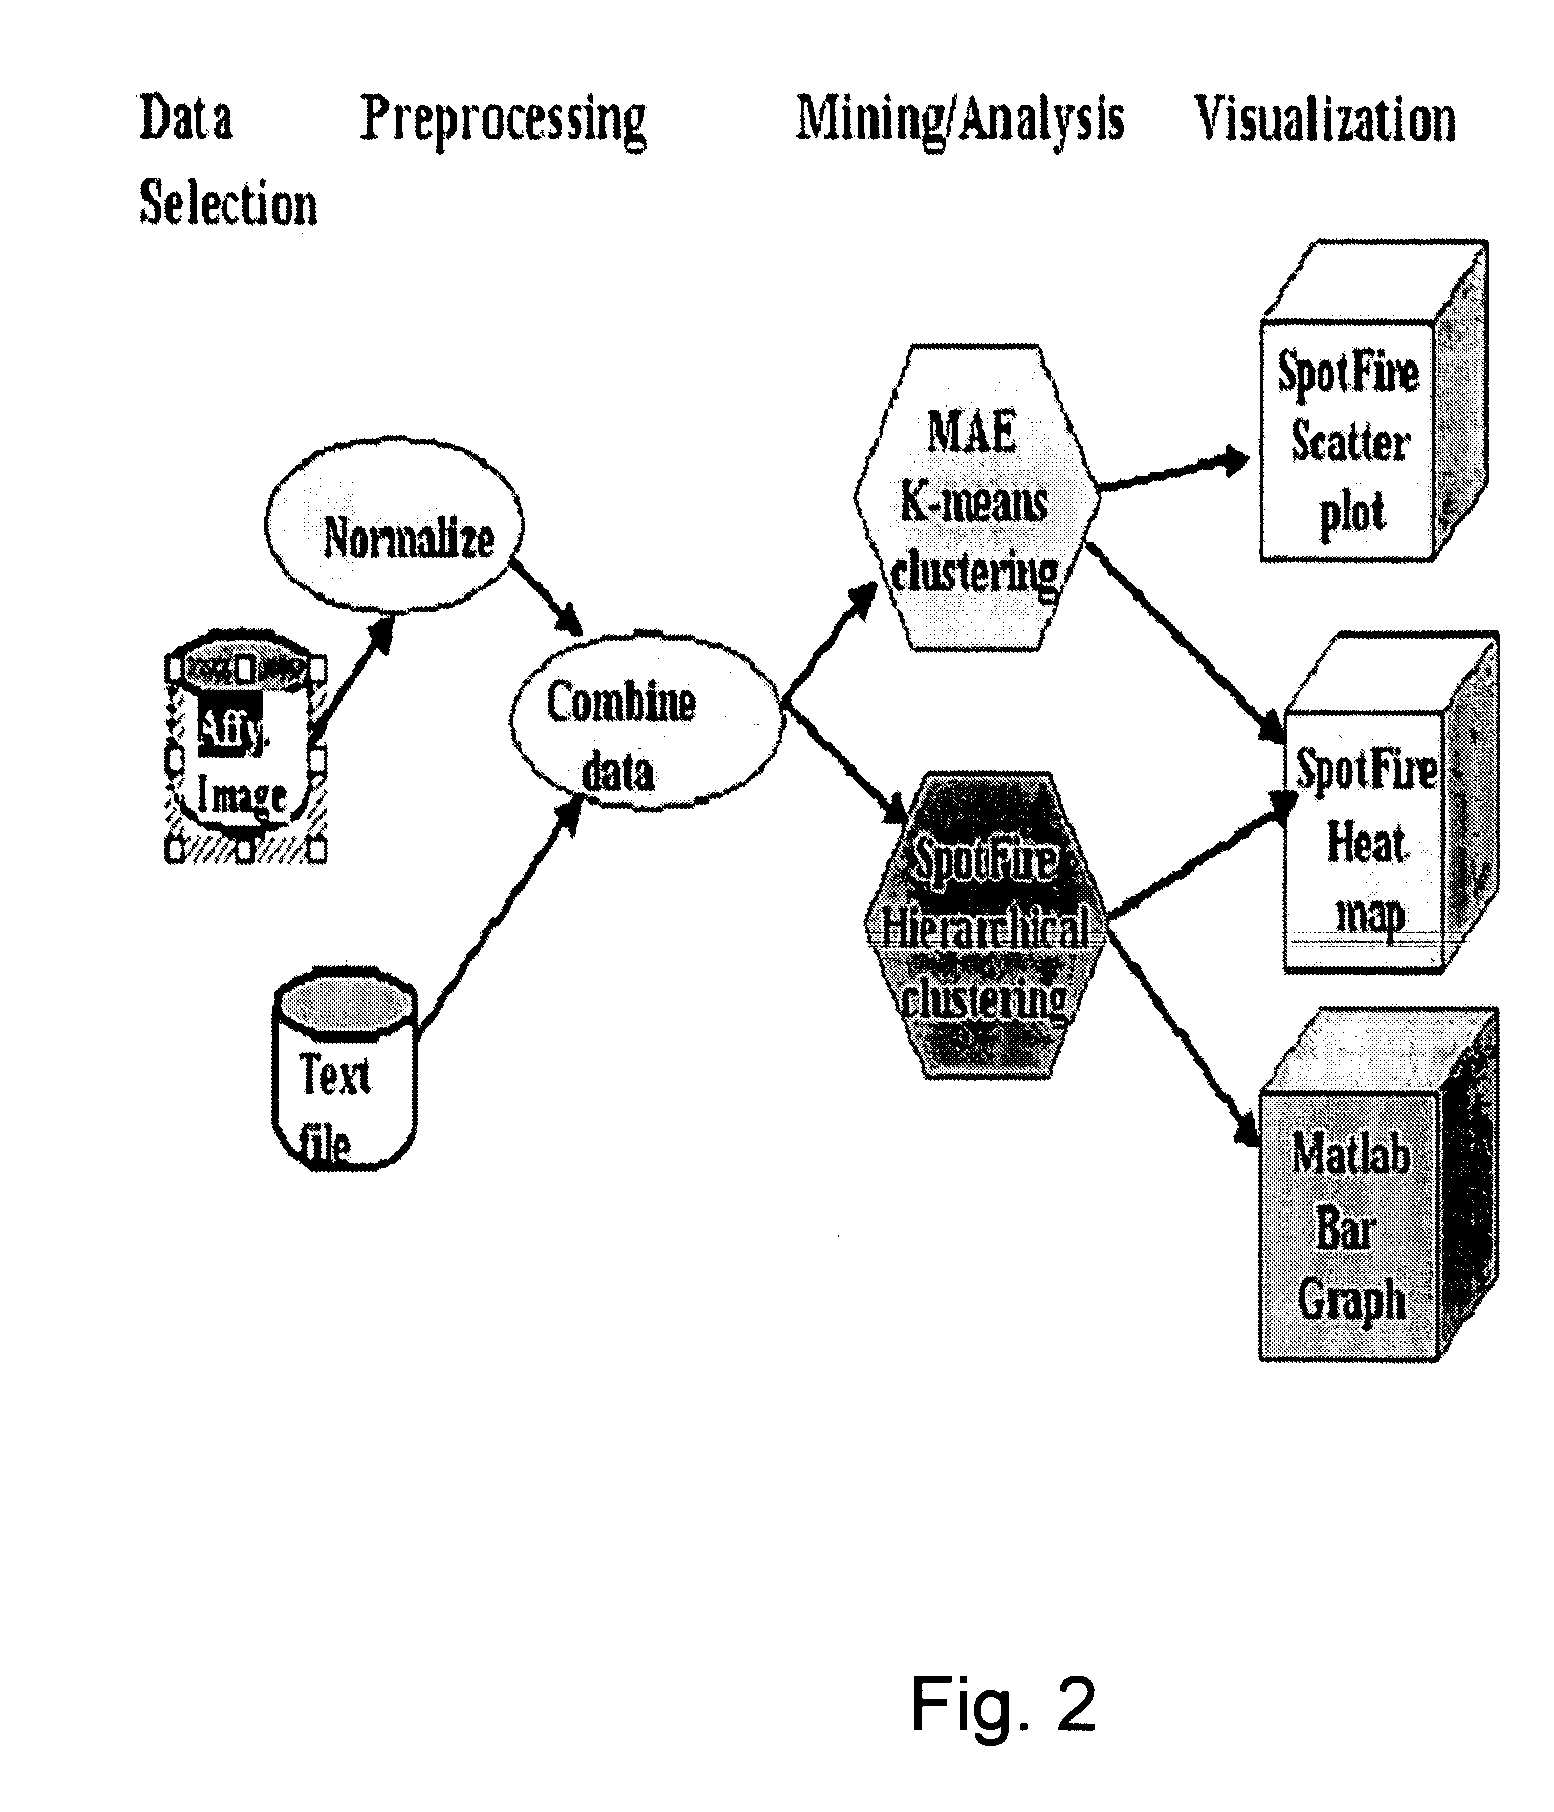 Automatic composition of services through semantic attribute matching